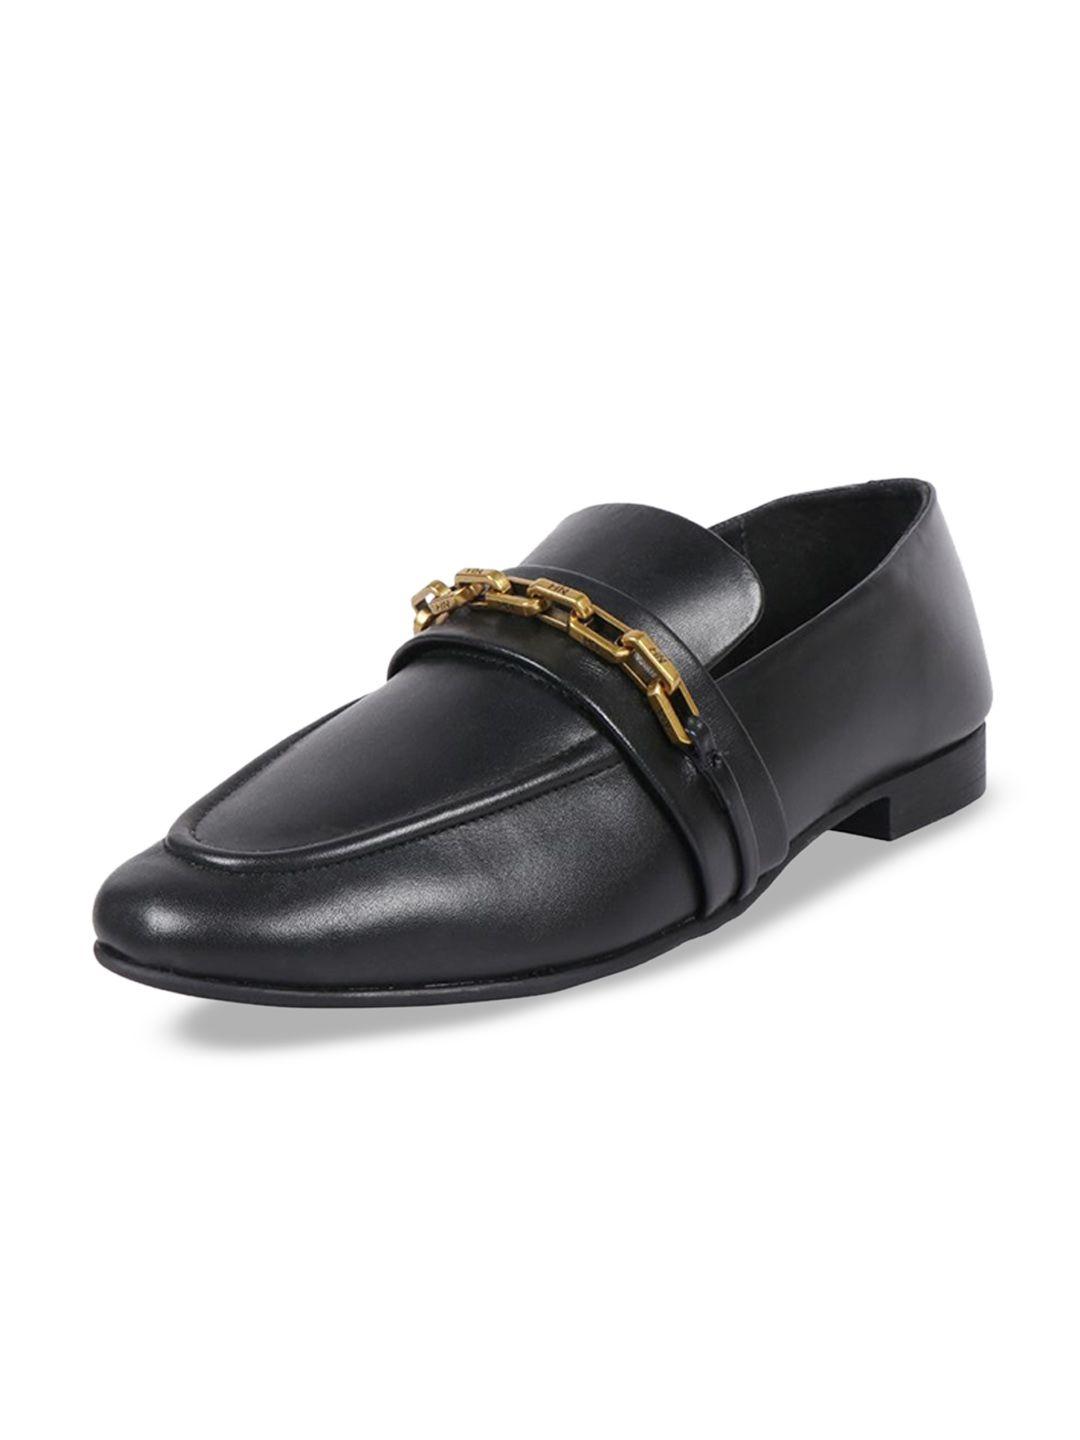 hidesign-women-vienna-embellished-leather-loafers